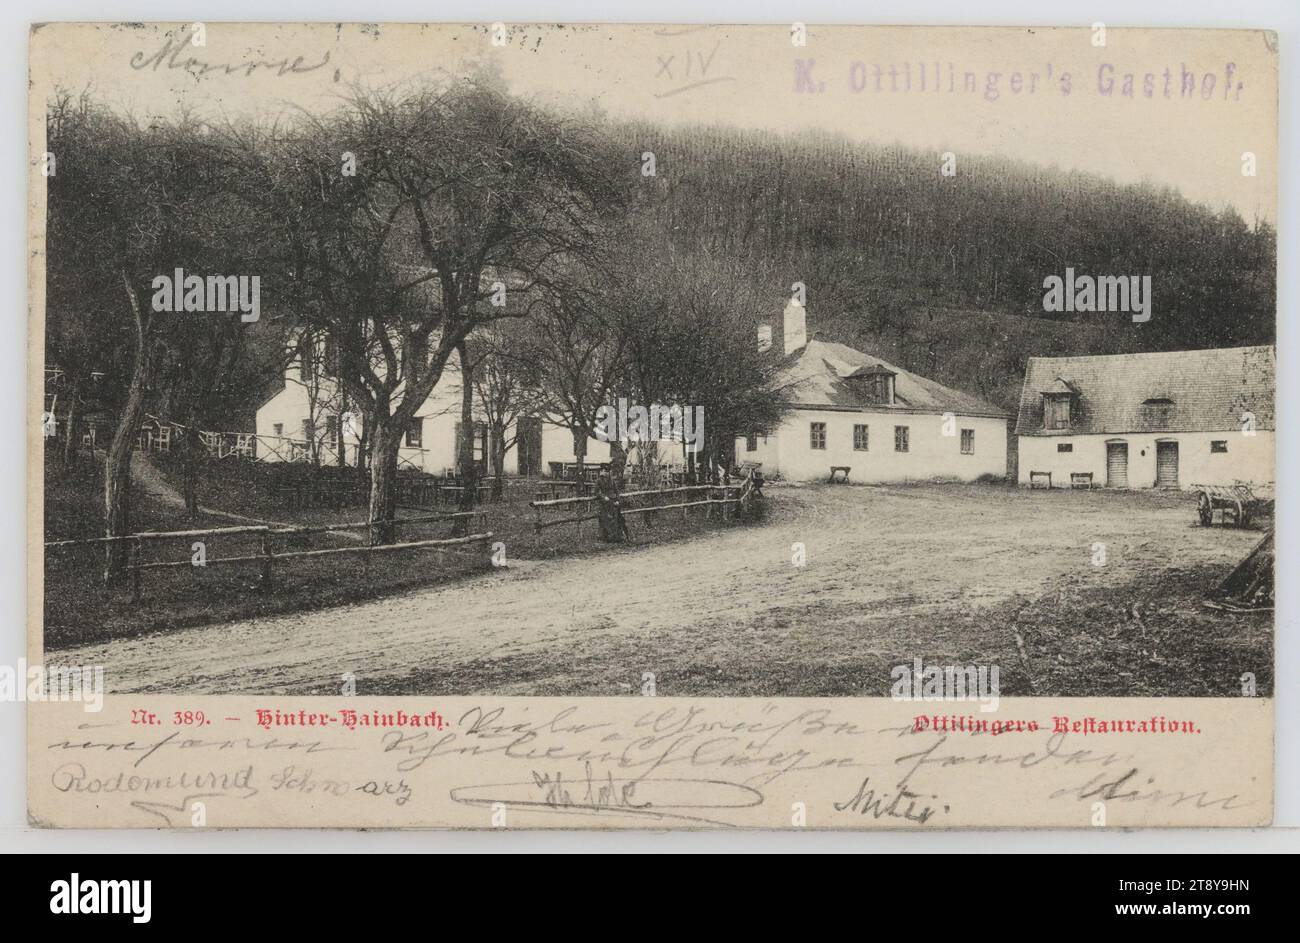 14th, Hainbach - K. Ottillinger's Gasthof, picture postcard, Unknown, 1903, cardboard, collotype, inscription, FROM, Hadersdorf-Weidlingau, TO, Schärding, ADDRESS, Frl. [...] [...], Institute d. engl. Frl, Schärding, P.O. Box, MESSAGE, Marie, Send many greetings from our school trip, Rodomund Schwarz, Hilde, Mizzi, Mimi, Wienerwald, Hotel and restaurant business, Postcards with transliteration, 14th district: Penzing, with people, handwriting, written text, The Vienna Collection Stock Photo